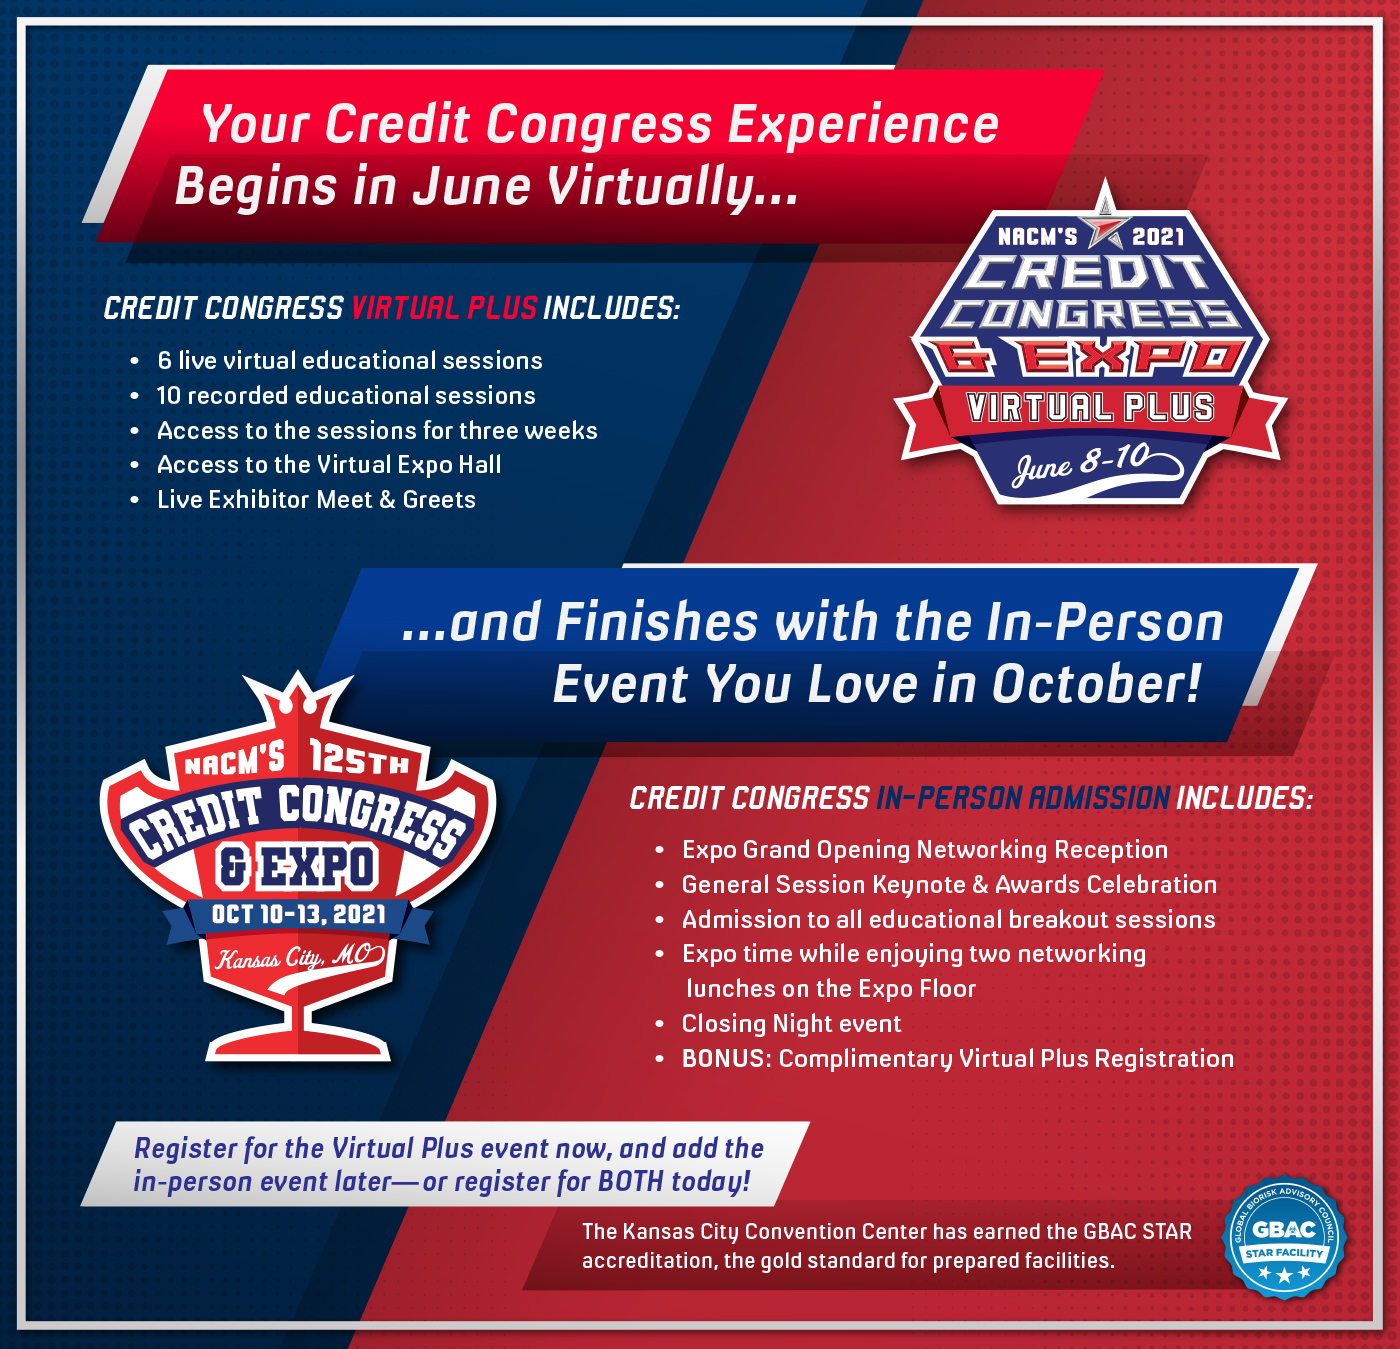 Learn more about this year's Credit Congress offerings